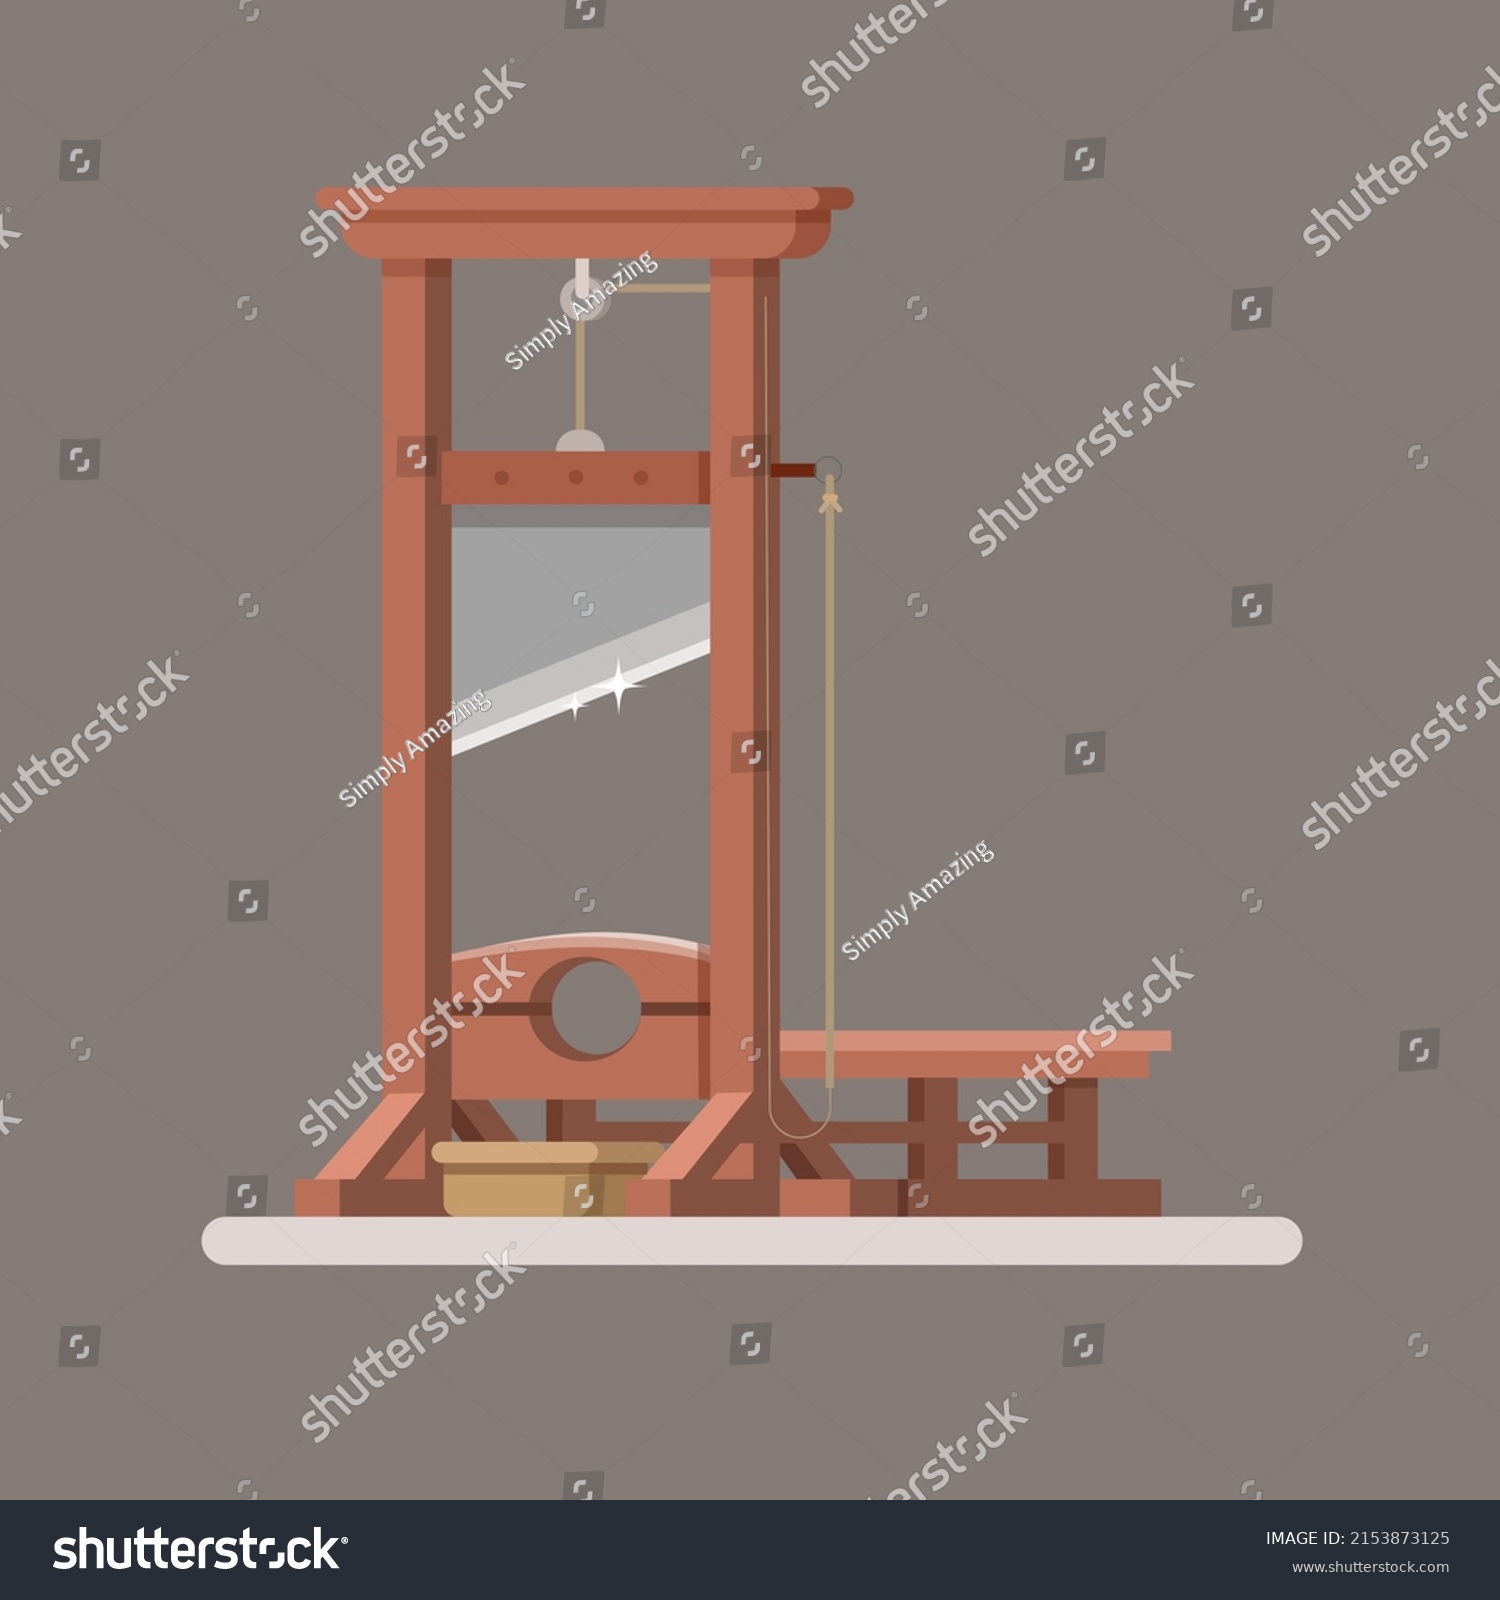 Guillotine Punishment Device Executions By Beheading Stock Vector ...